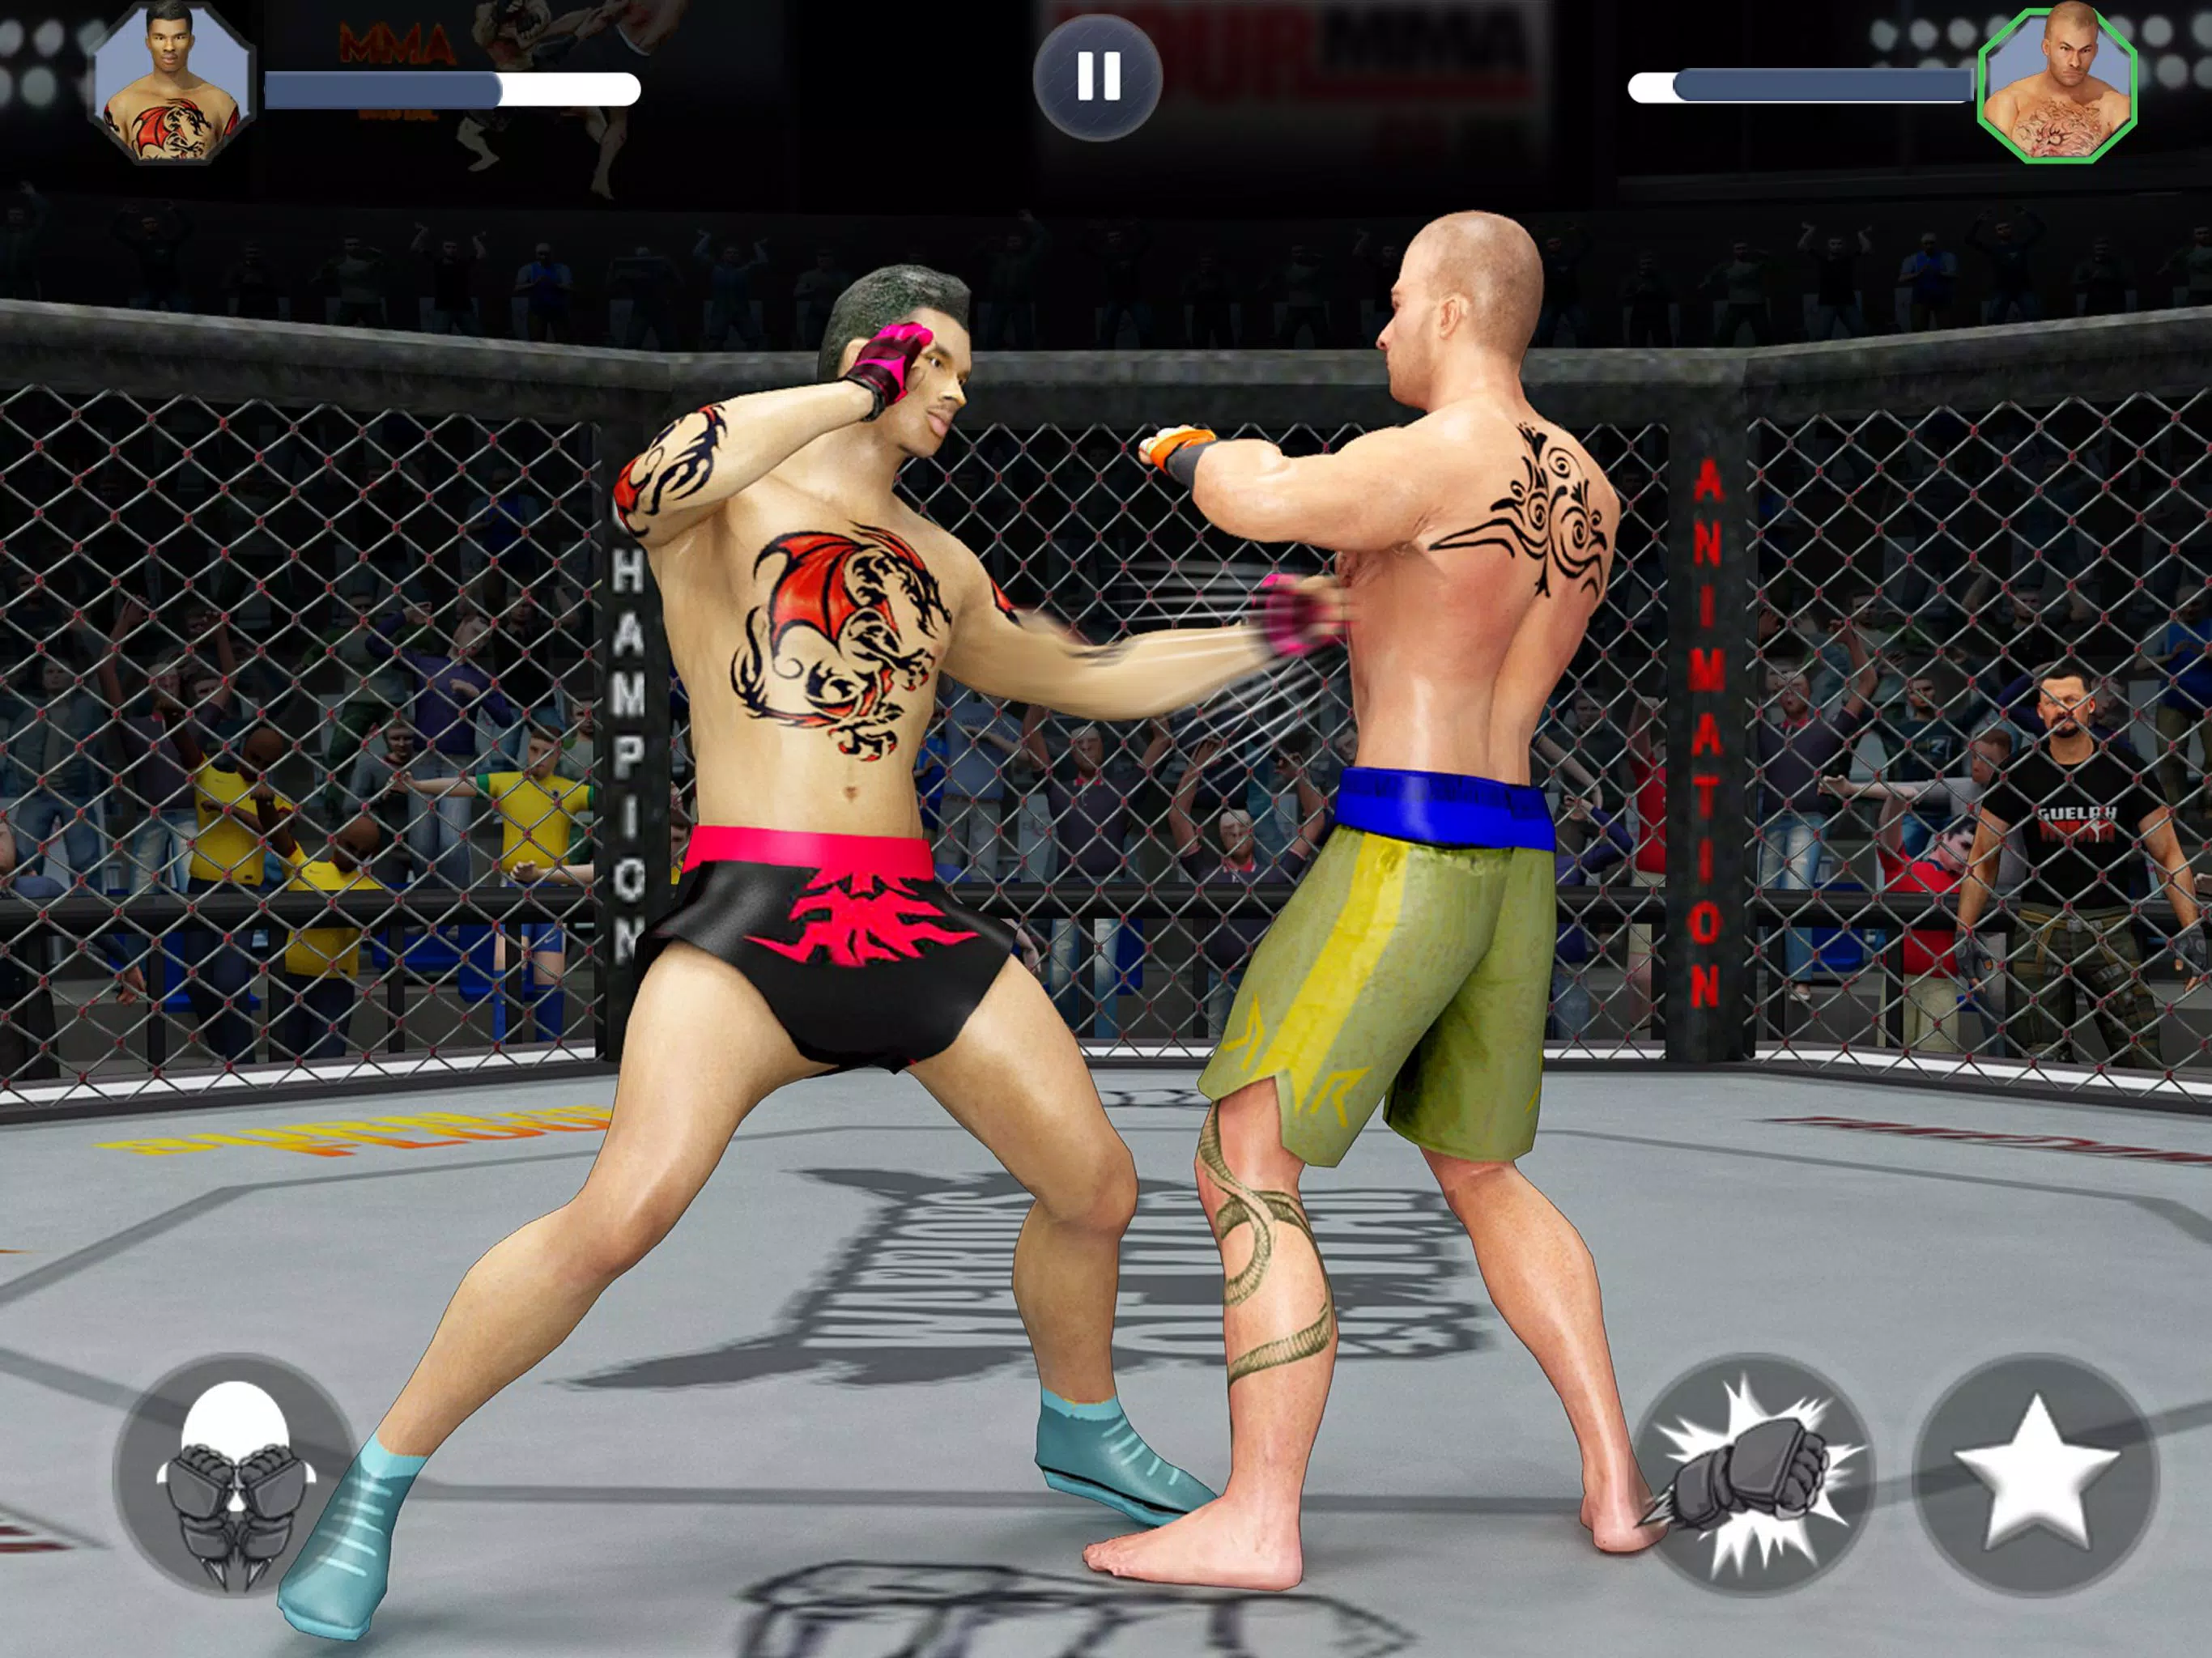 Martial Arts Kick Boxing Game for Android - APK Download